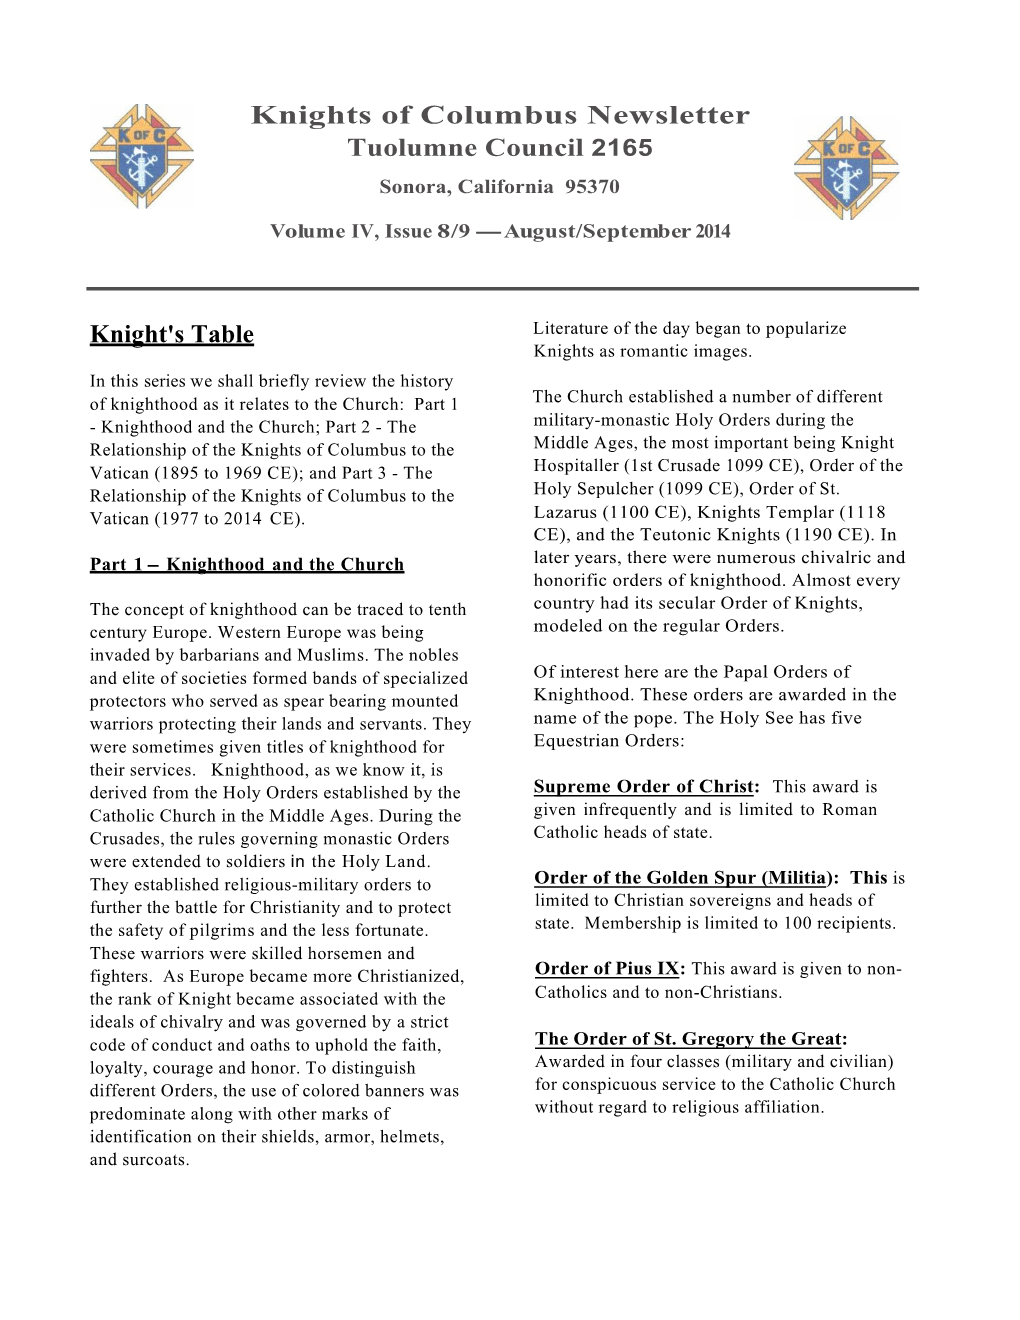 Knights of Columbus Newsletter Tuolumne Council 2165 Knight's